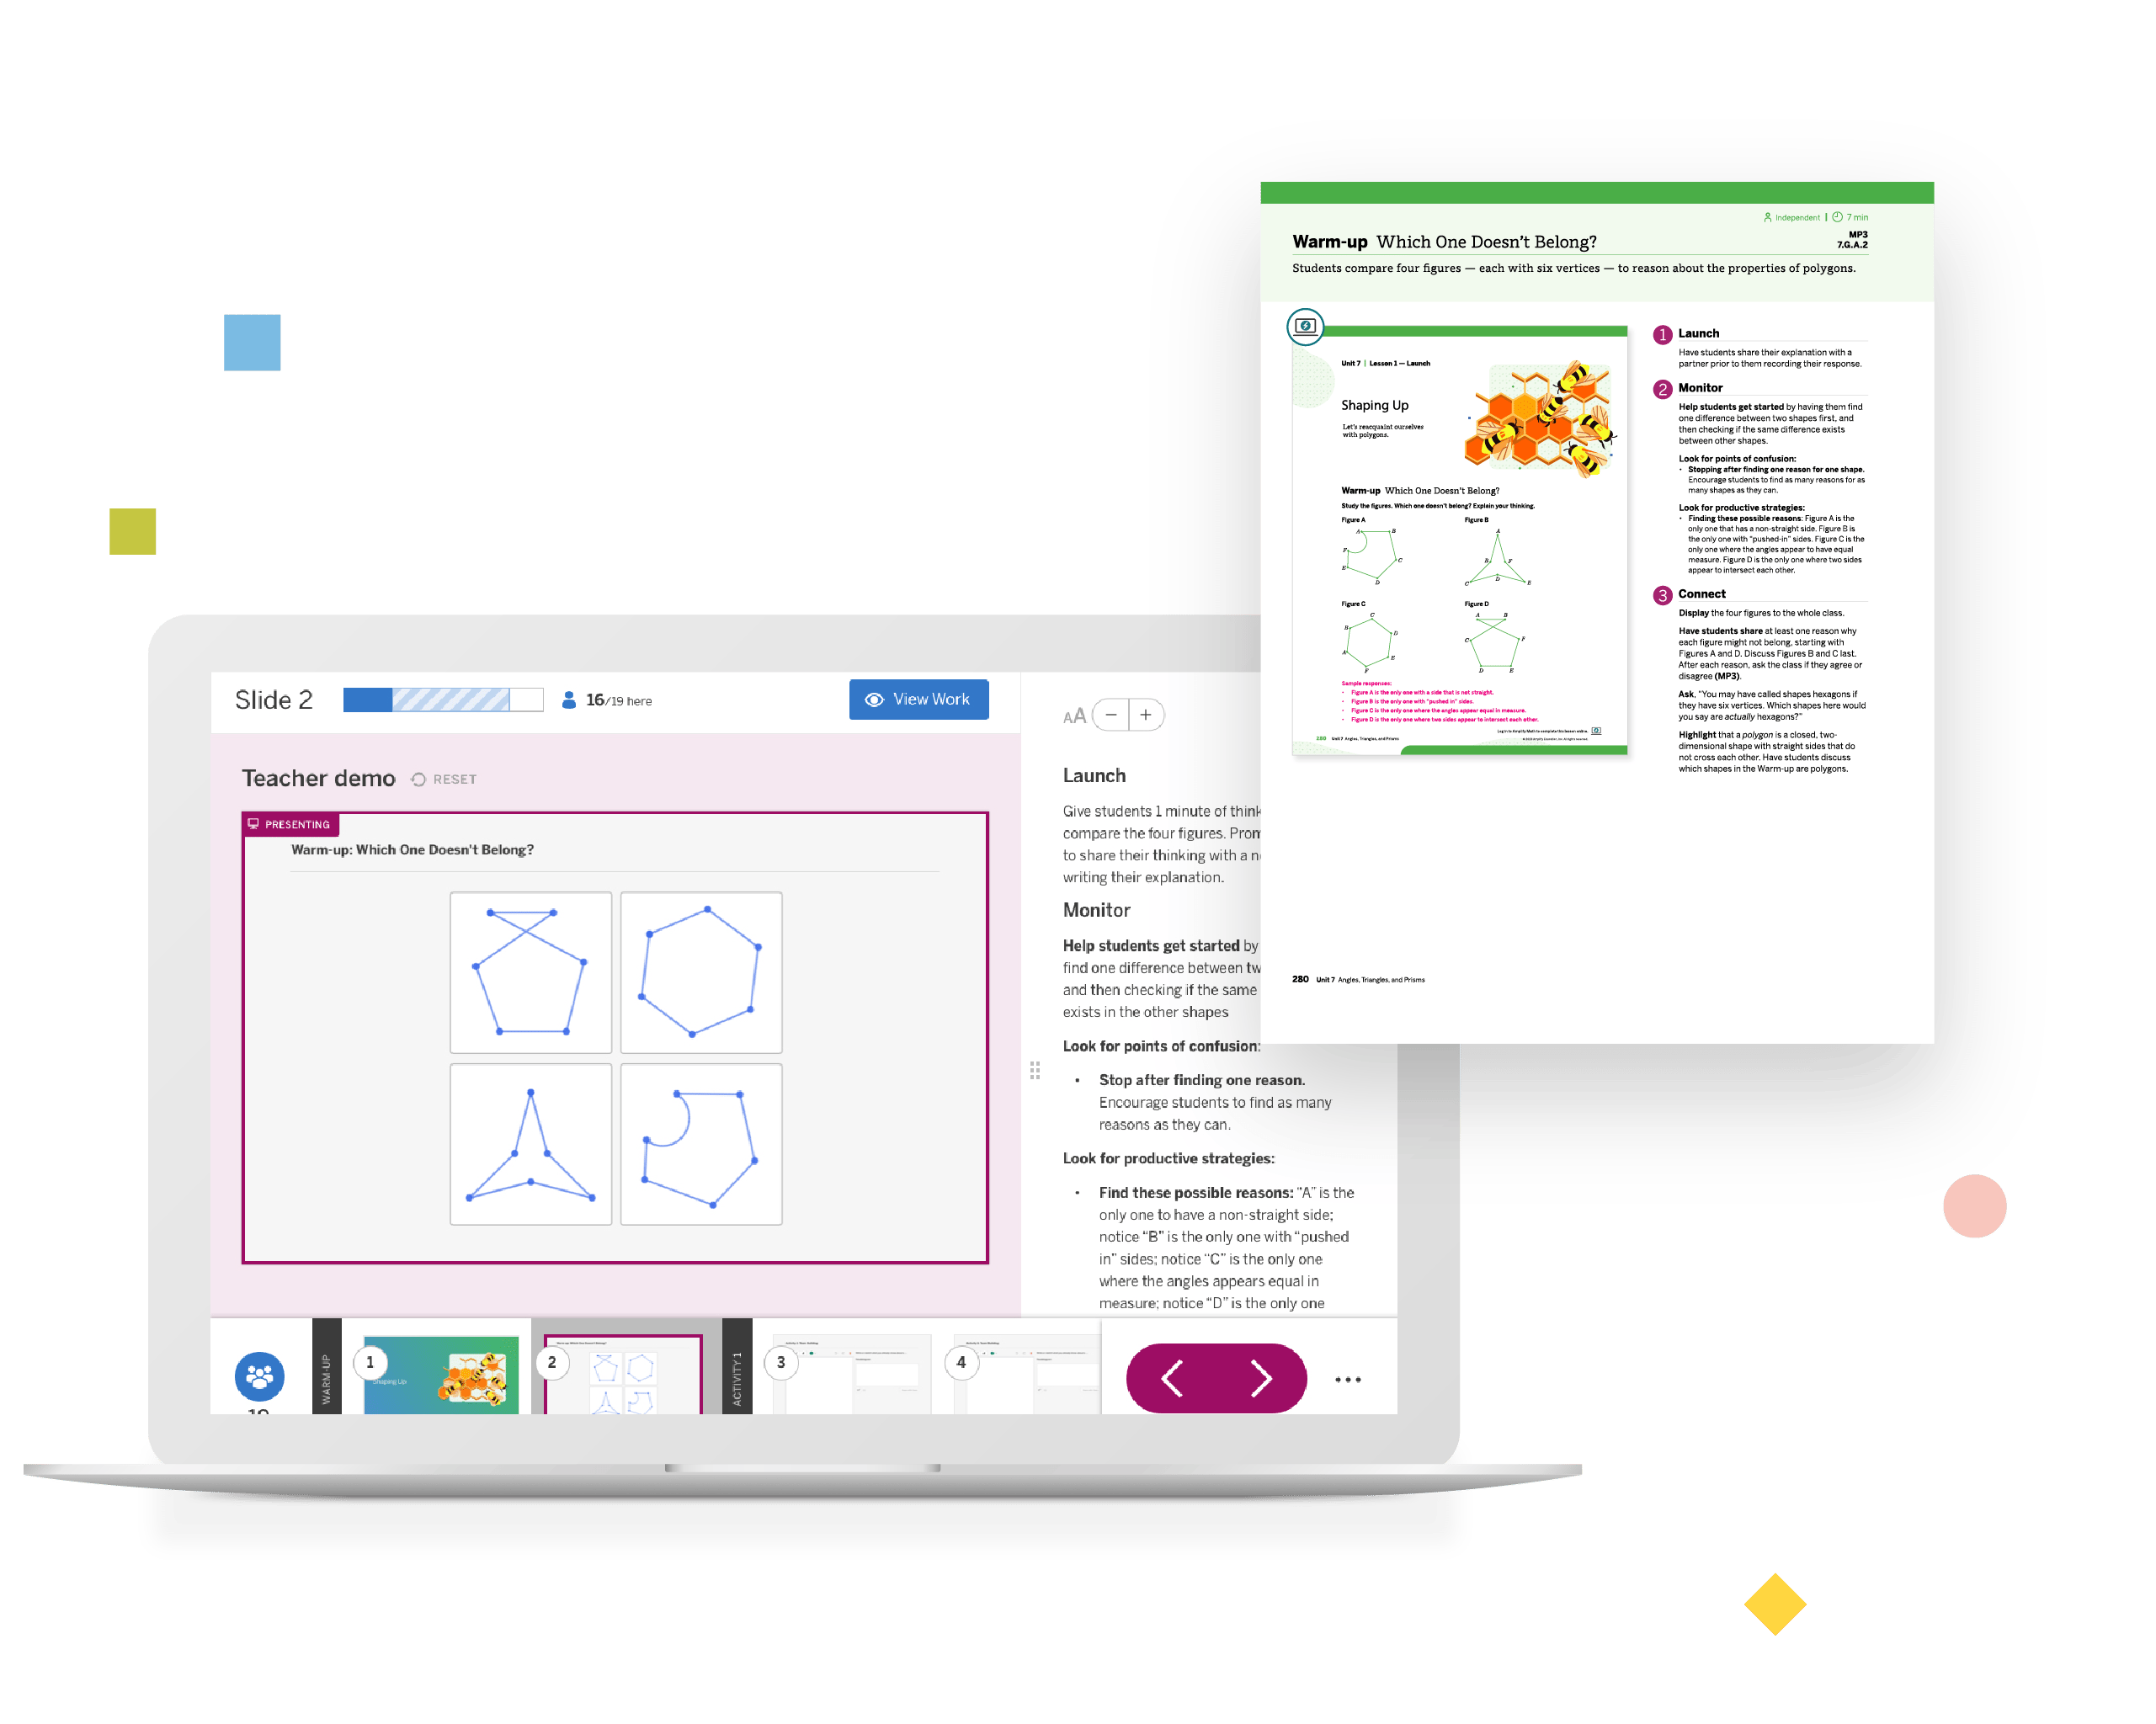 Illustration of two laptop screens displaying educational content, with one showing geometric shapes from the Amplify Math curriculum and the other featuring a text-heavy science lesson.